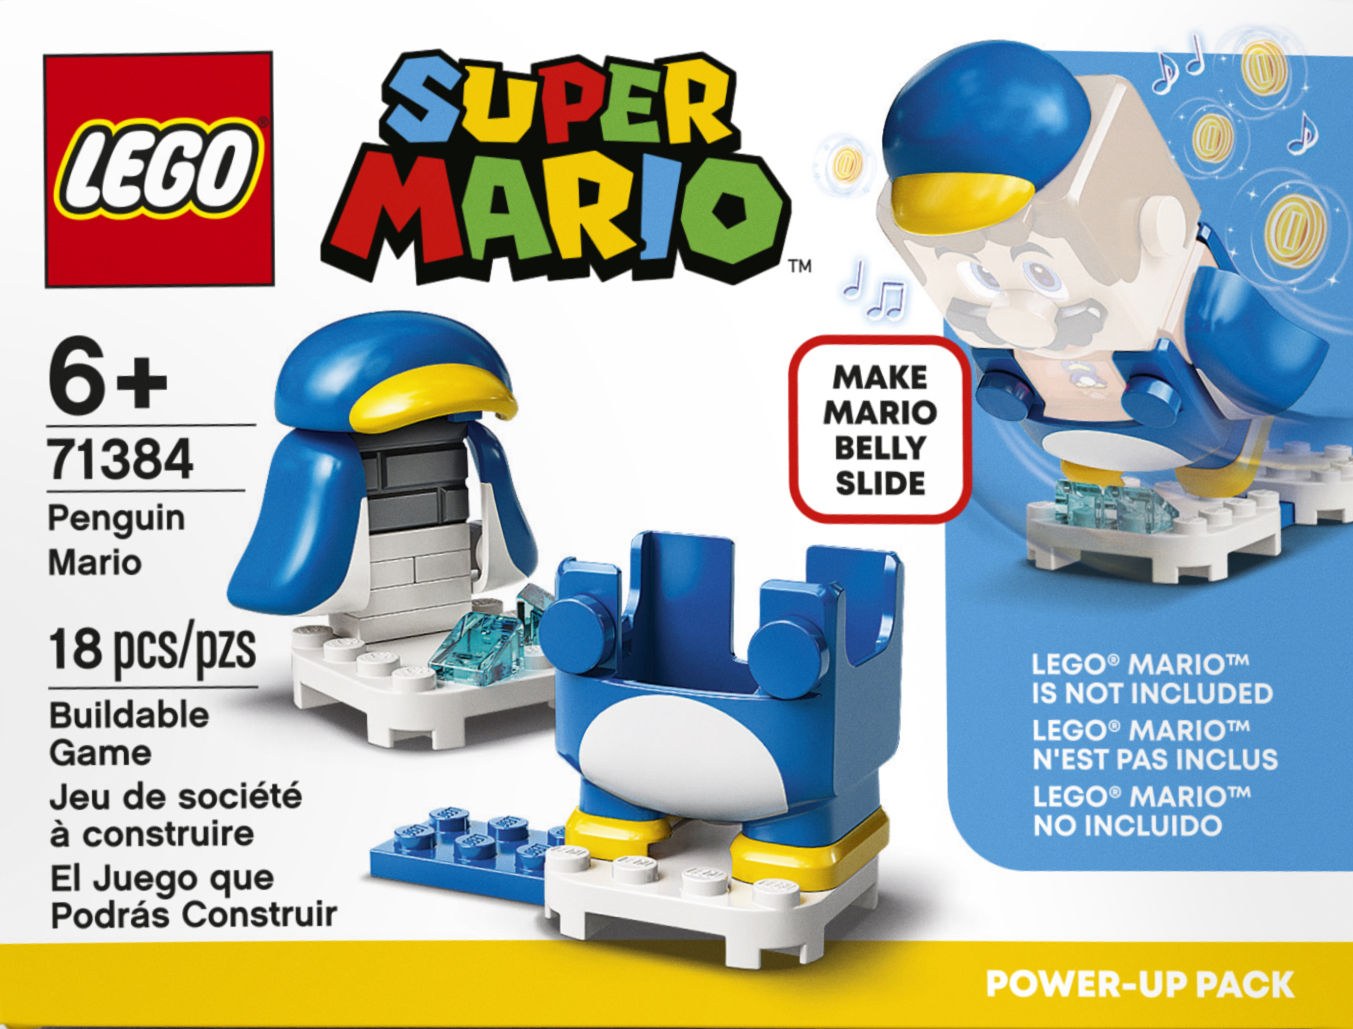 LEGO Super Mario Brings Physical and Virtual Play Together - Nerdist